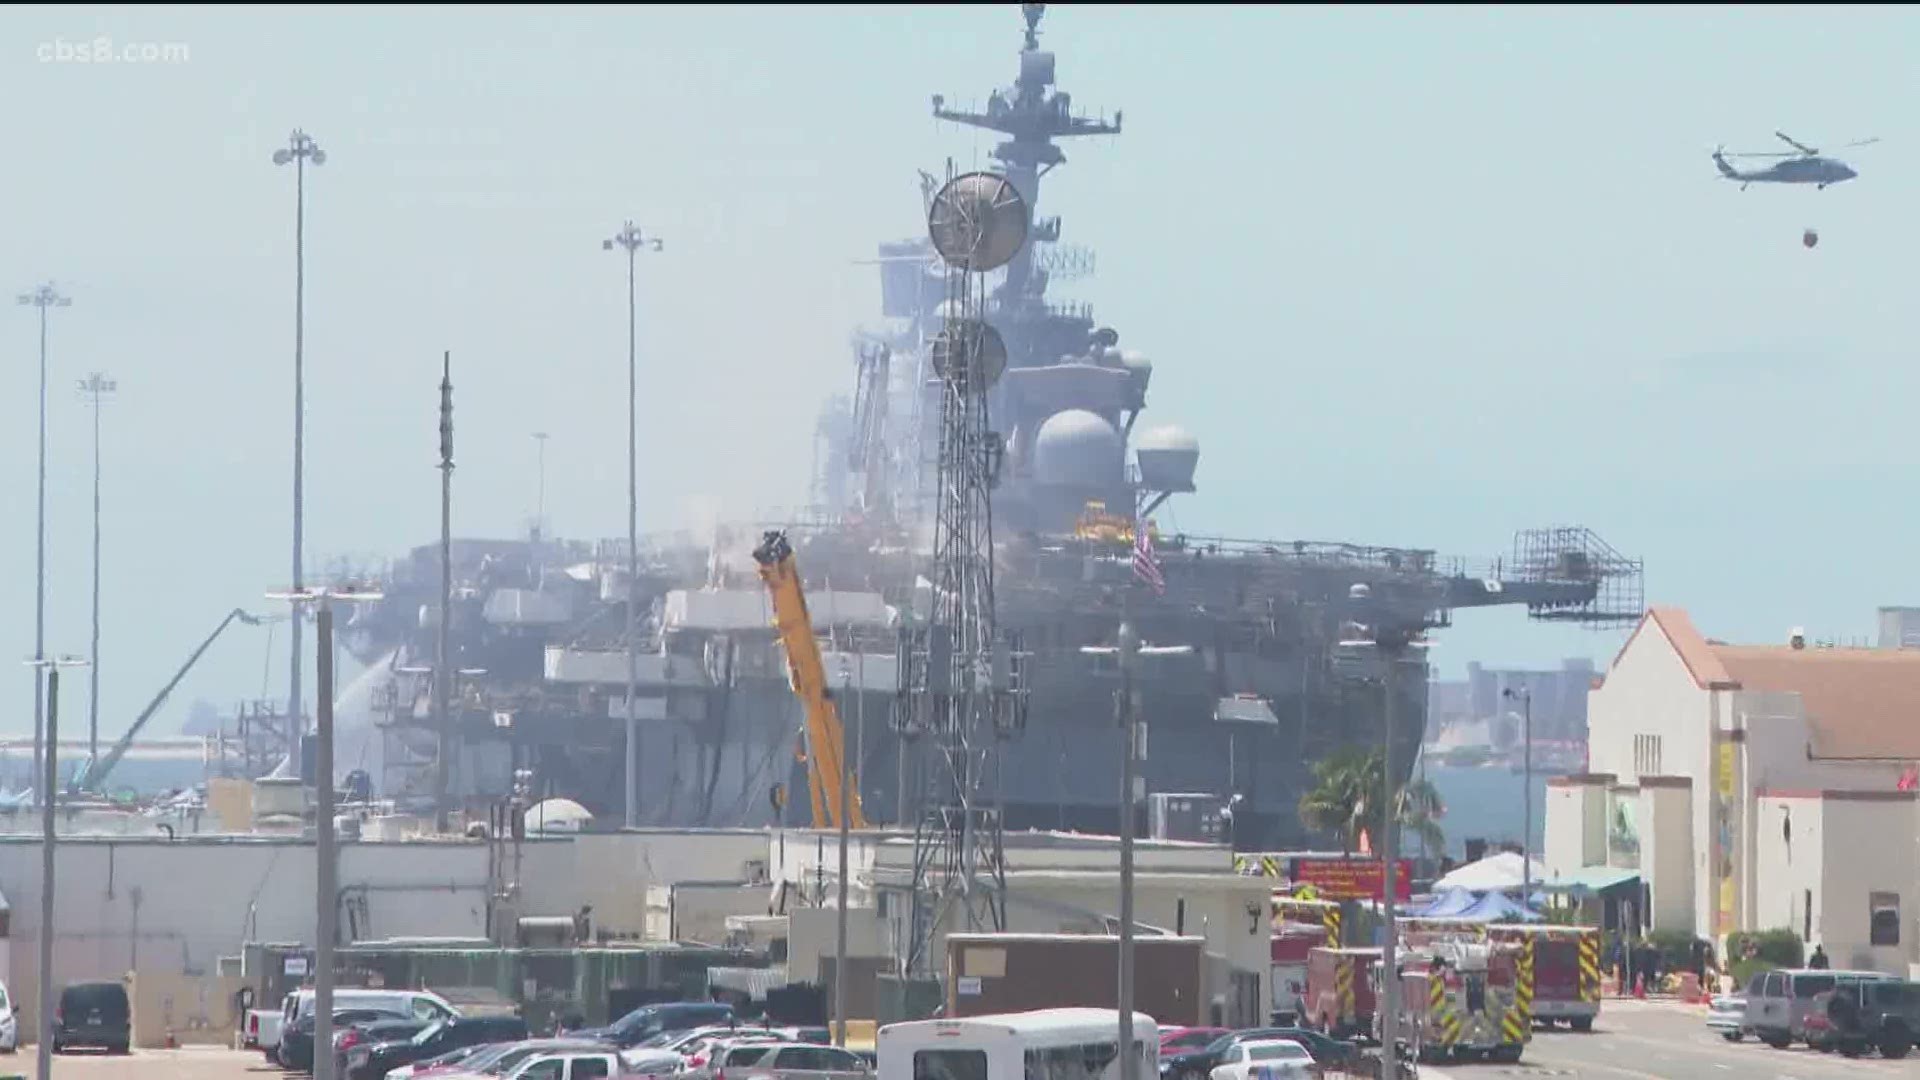 San Diego County analyzes air samples as USS Bonhomme Richard fire burns for 3rd day